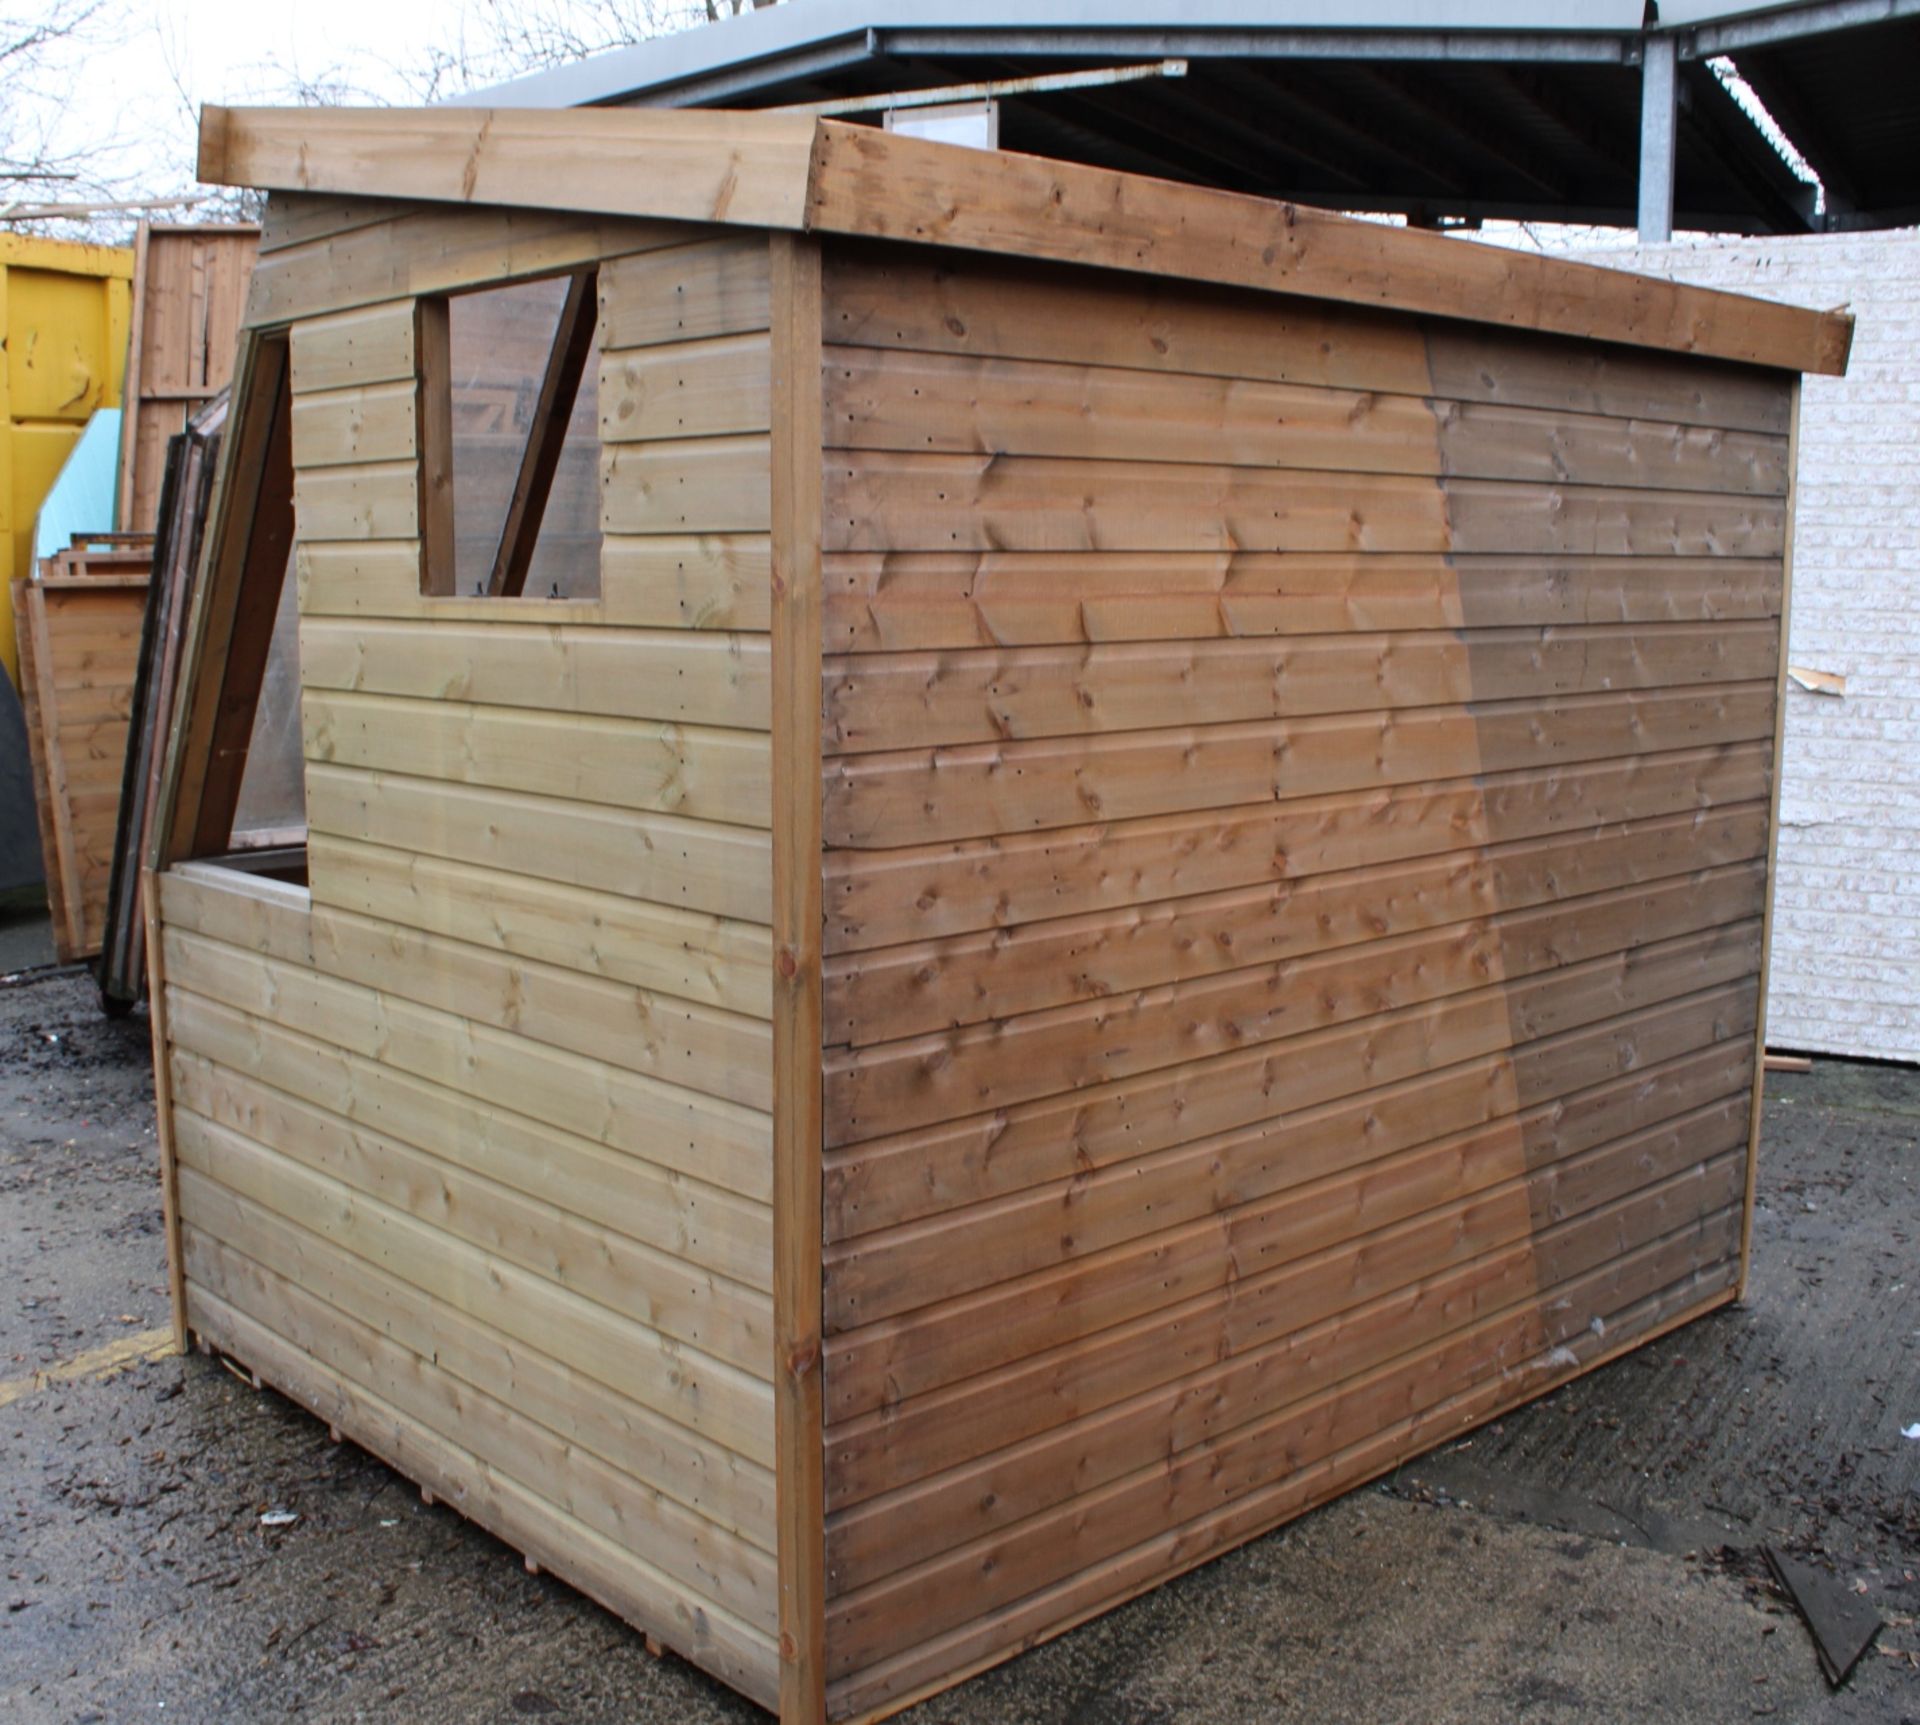 8x6 Exdisplay potting shed, Standard 16mm Nominal Cladding RRP£1,500 - Image 4 of 6